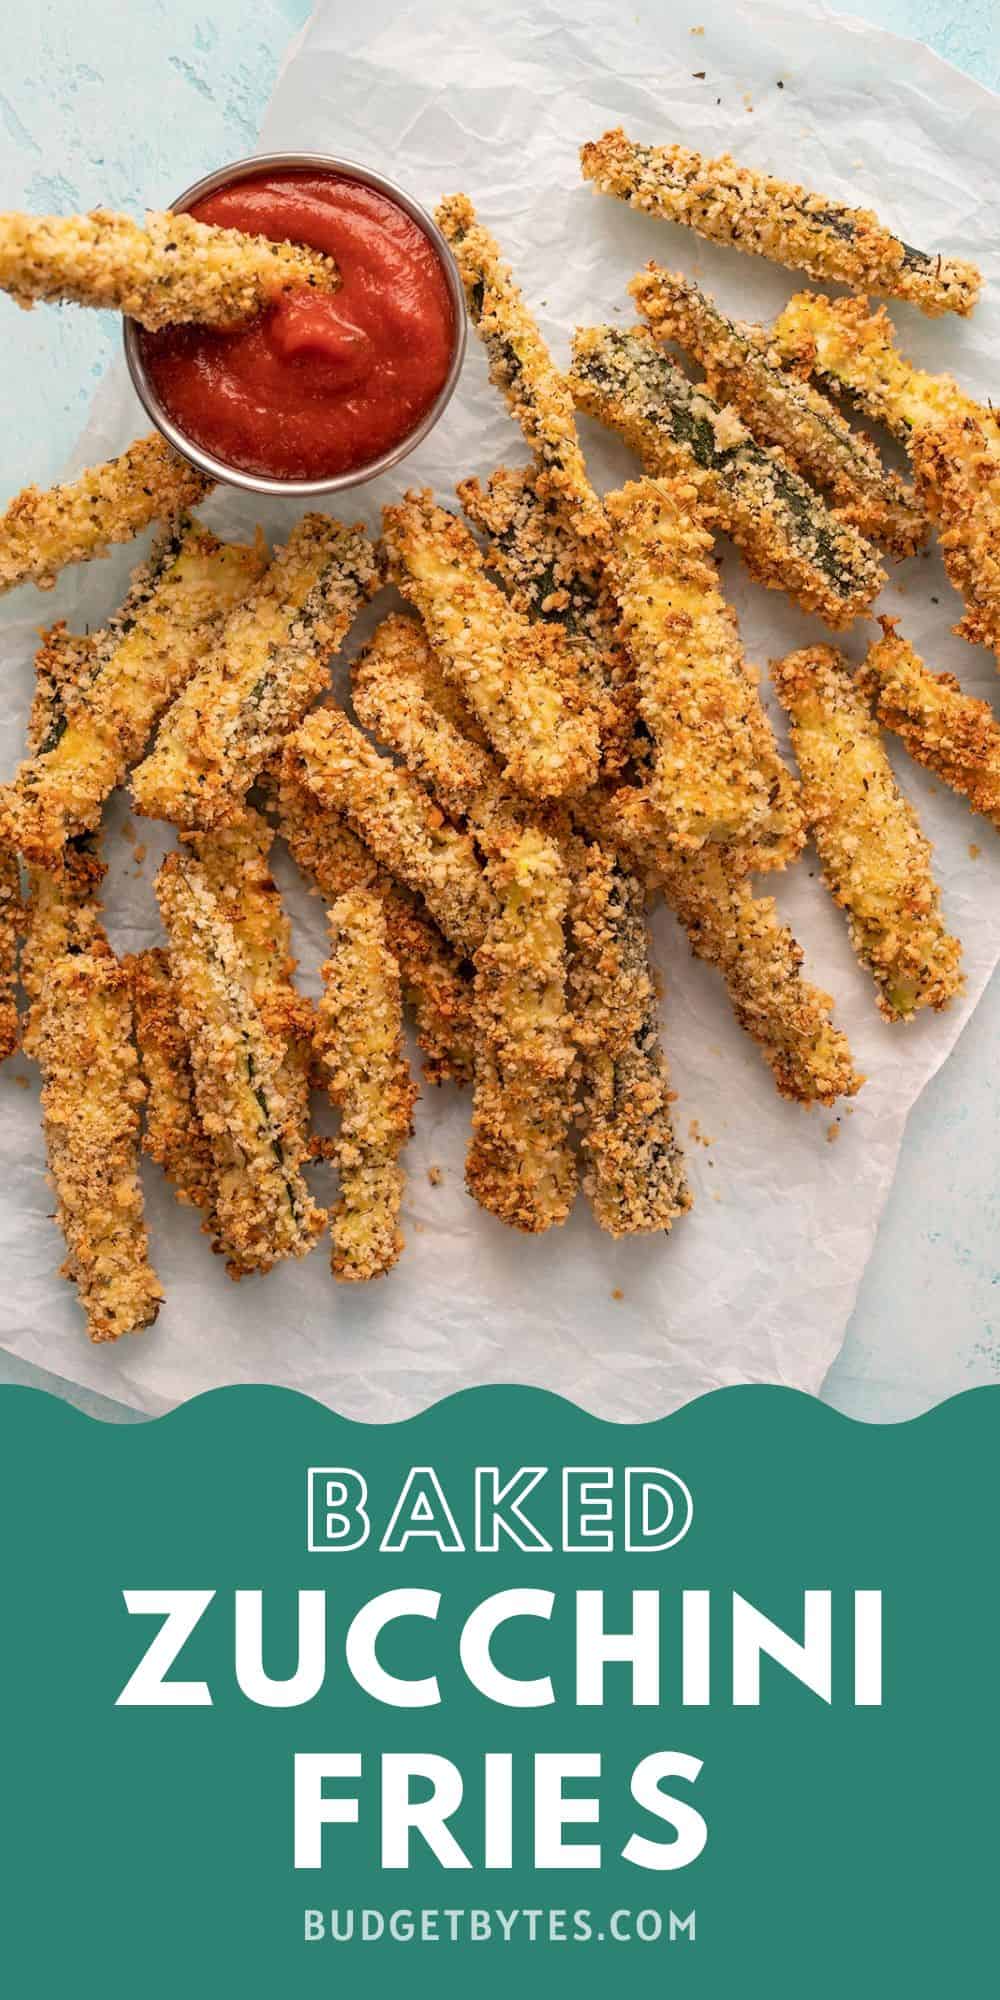 Baked Zucchini Fries - Step by Step Photos - Budget Bytes